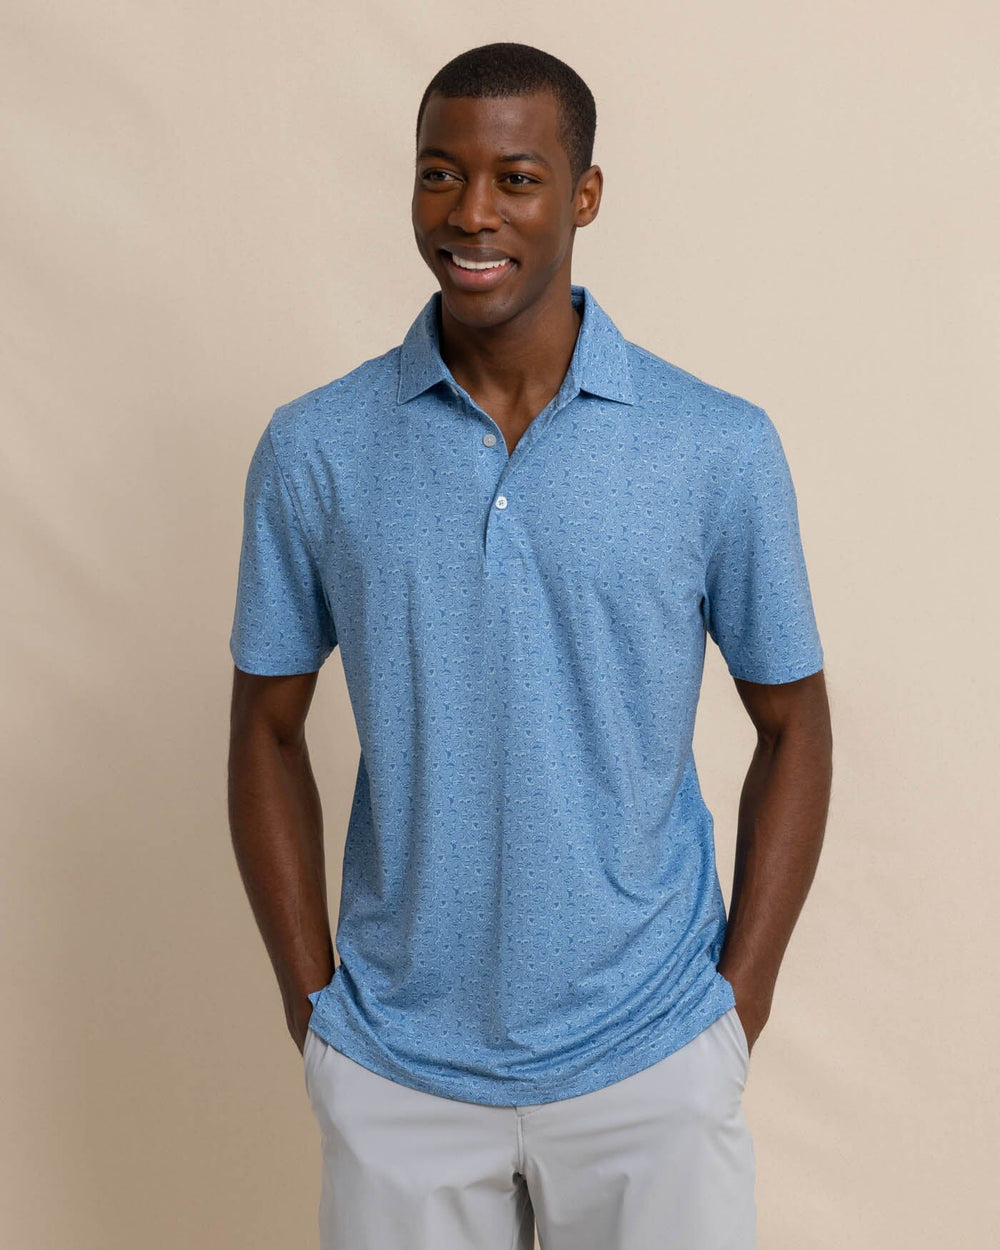 Men's Driver Let's Go Clubbing Printed Polo | Southern Tide